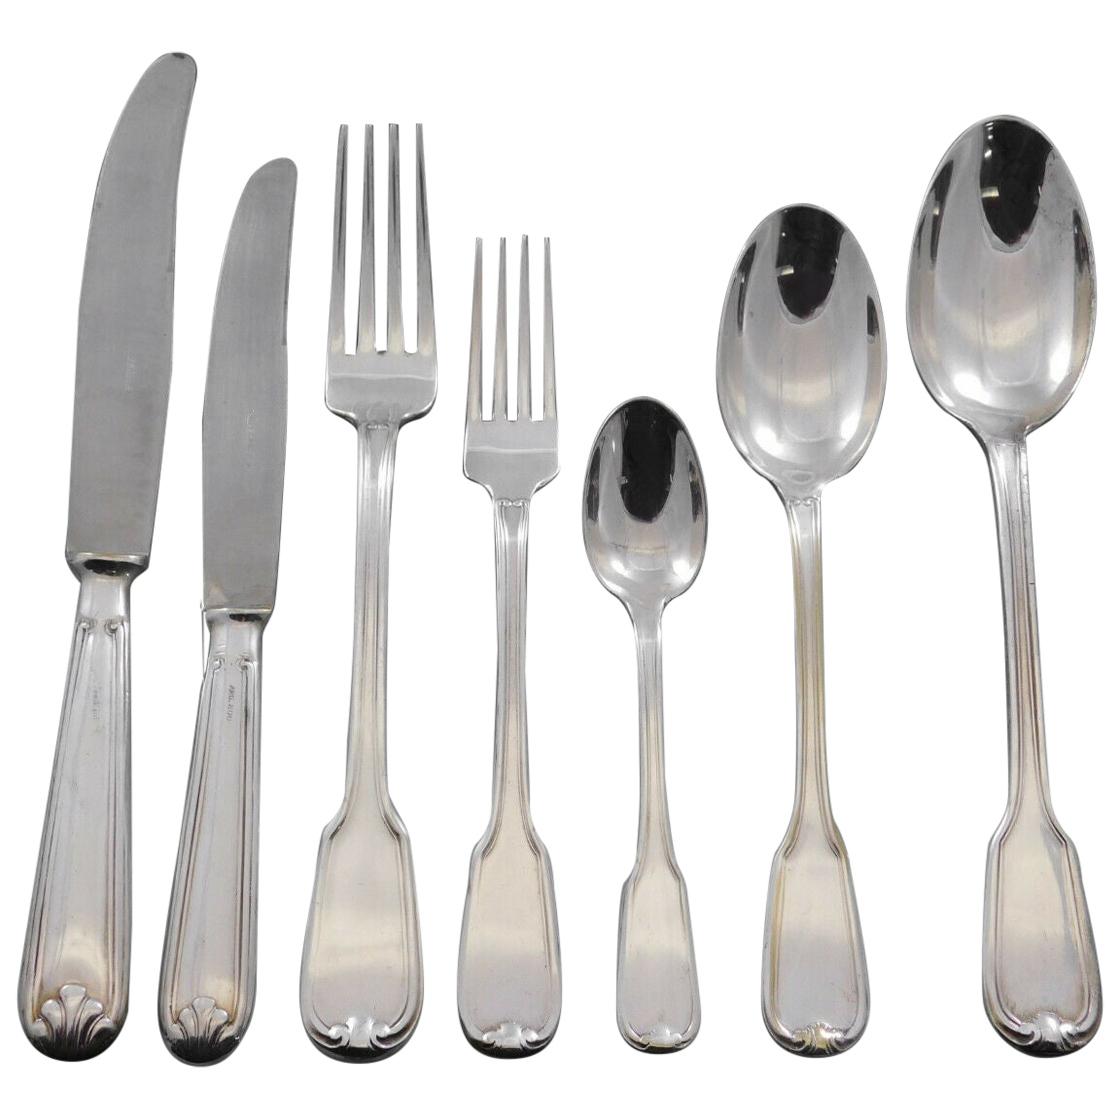 Large and heavy dinner size Fiddle Thread German 800 Silver Flatware set - 58 pieces. This set includes:

8 dinner size knives, 9 3/4